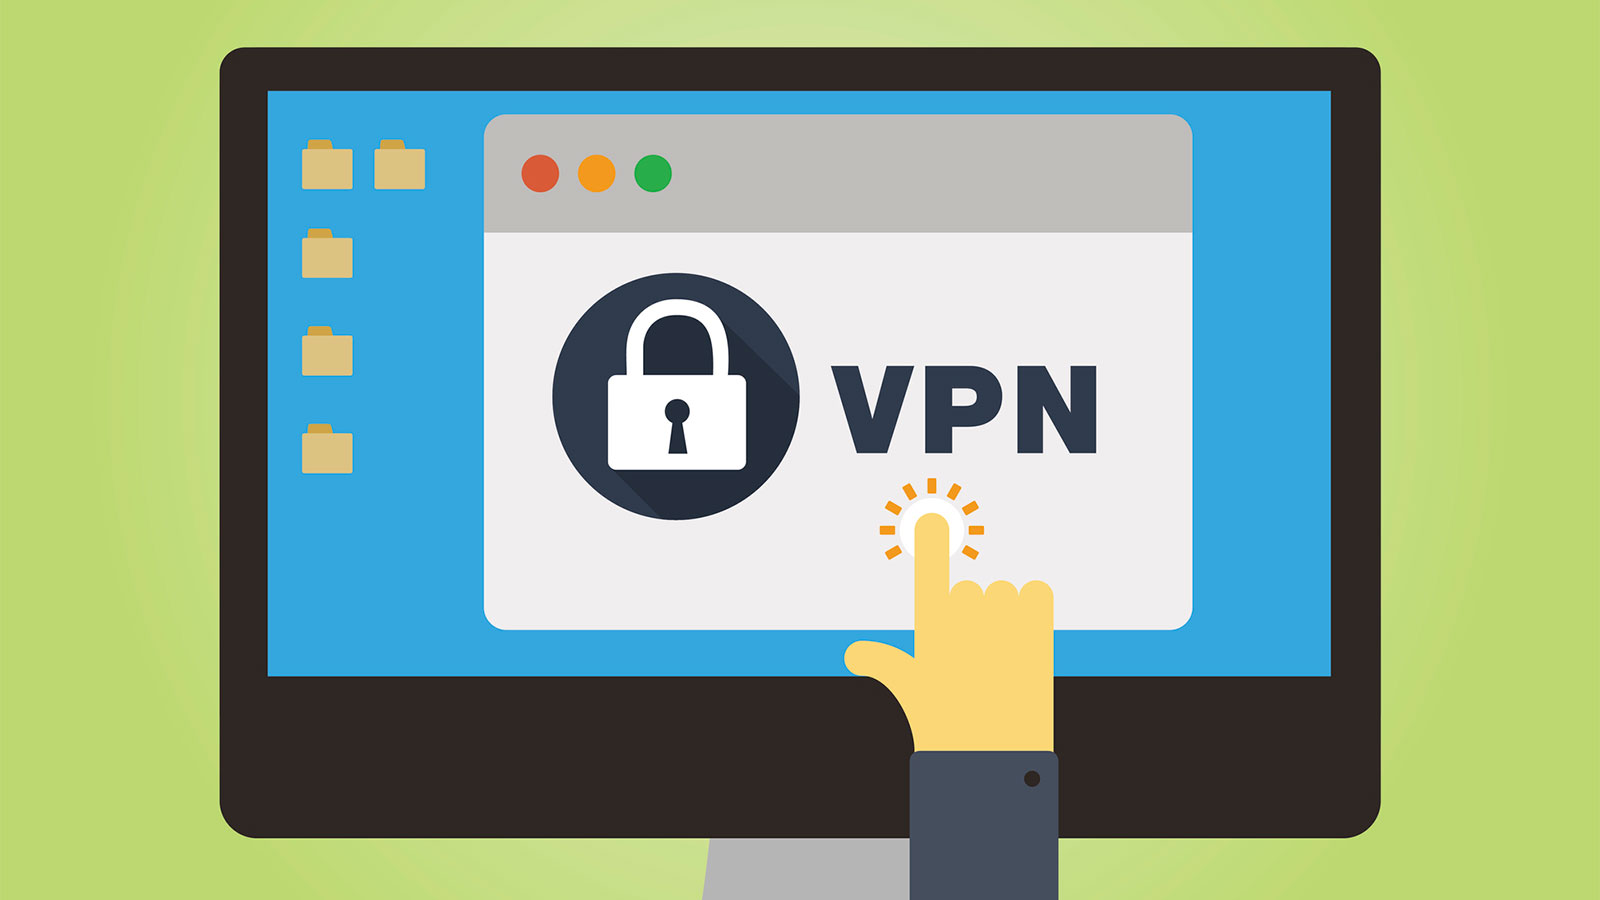 Do you need a VPN at work? Benefits and use cases